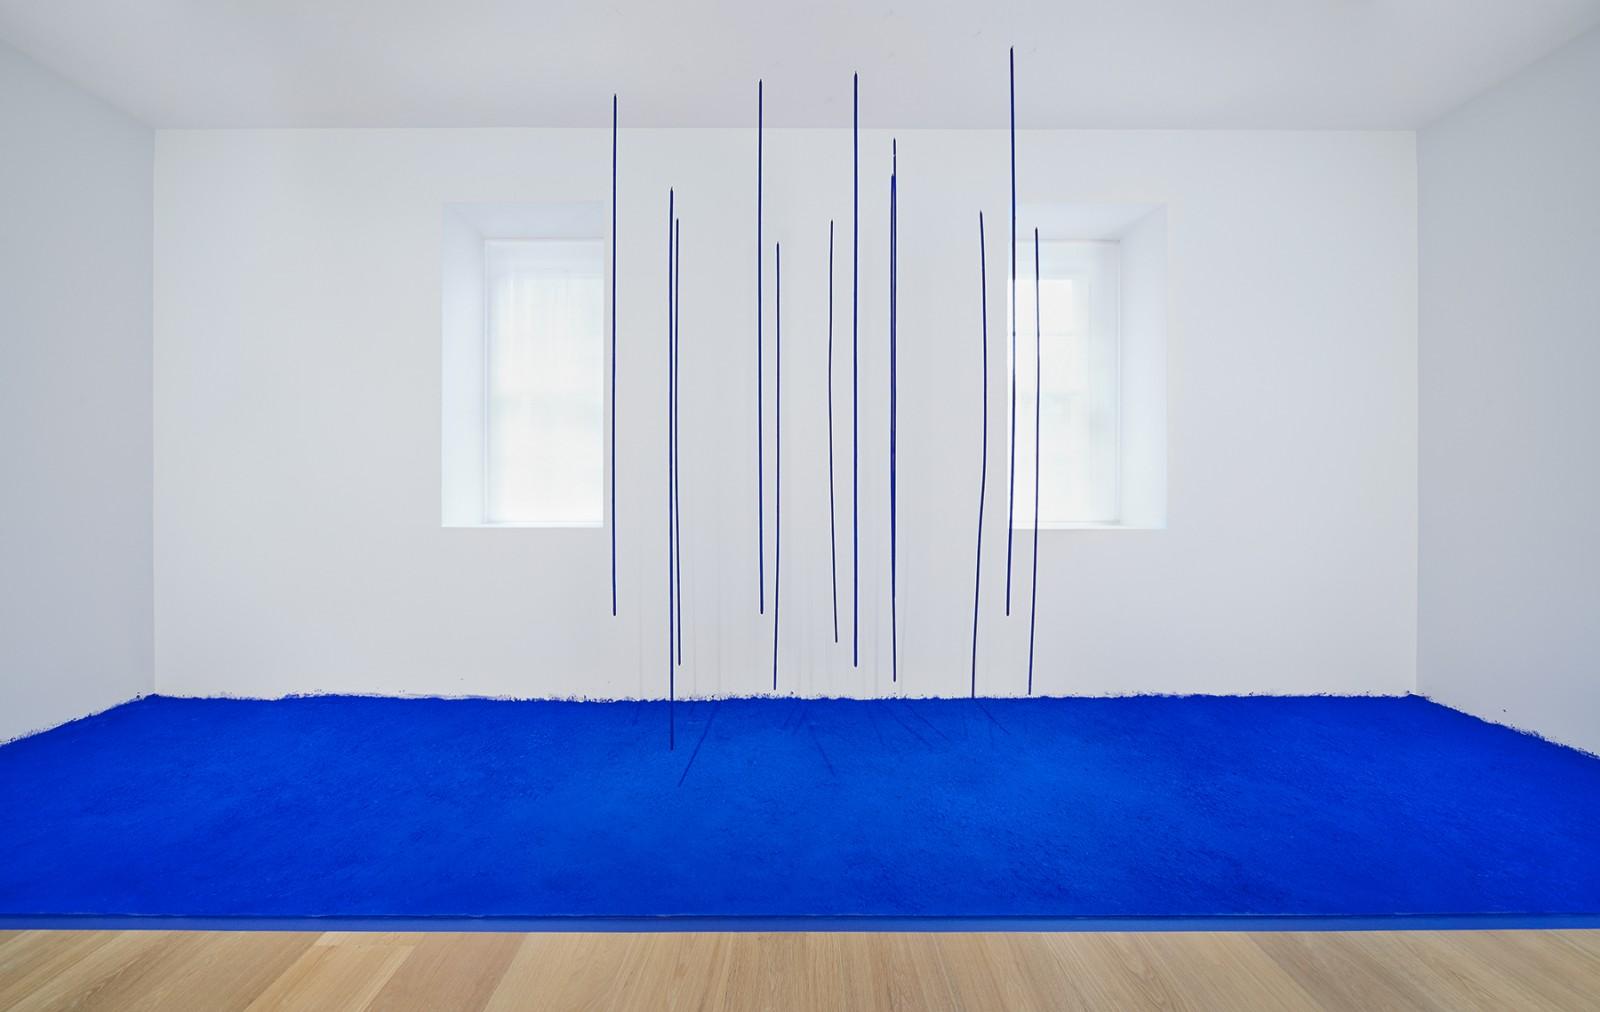 View of the exhibition "Audible Presence : Lucio Fontana Yves Klein Cy Twombly", Dominique Lévy Gallery, 2013 (S 36, PIG 1)